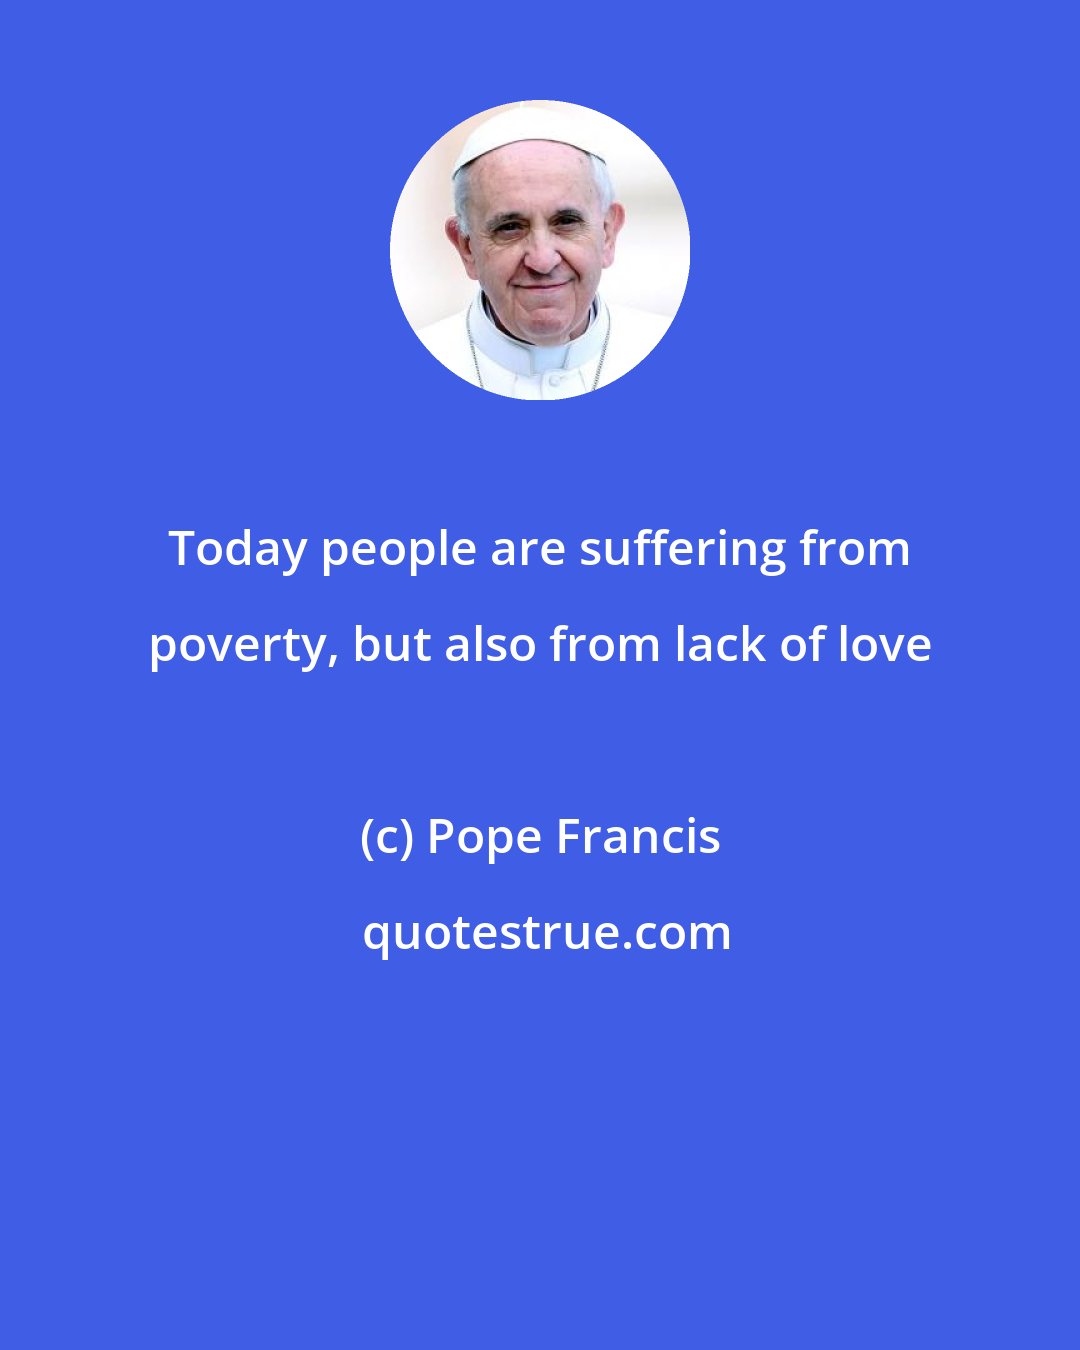 Pope Francis: Today people are suffering from poverty, but also from lack of love